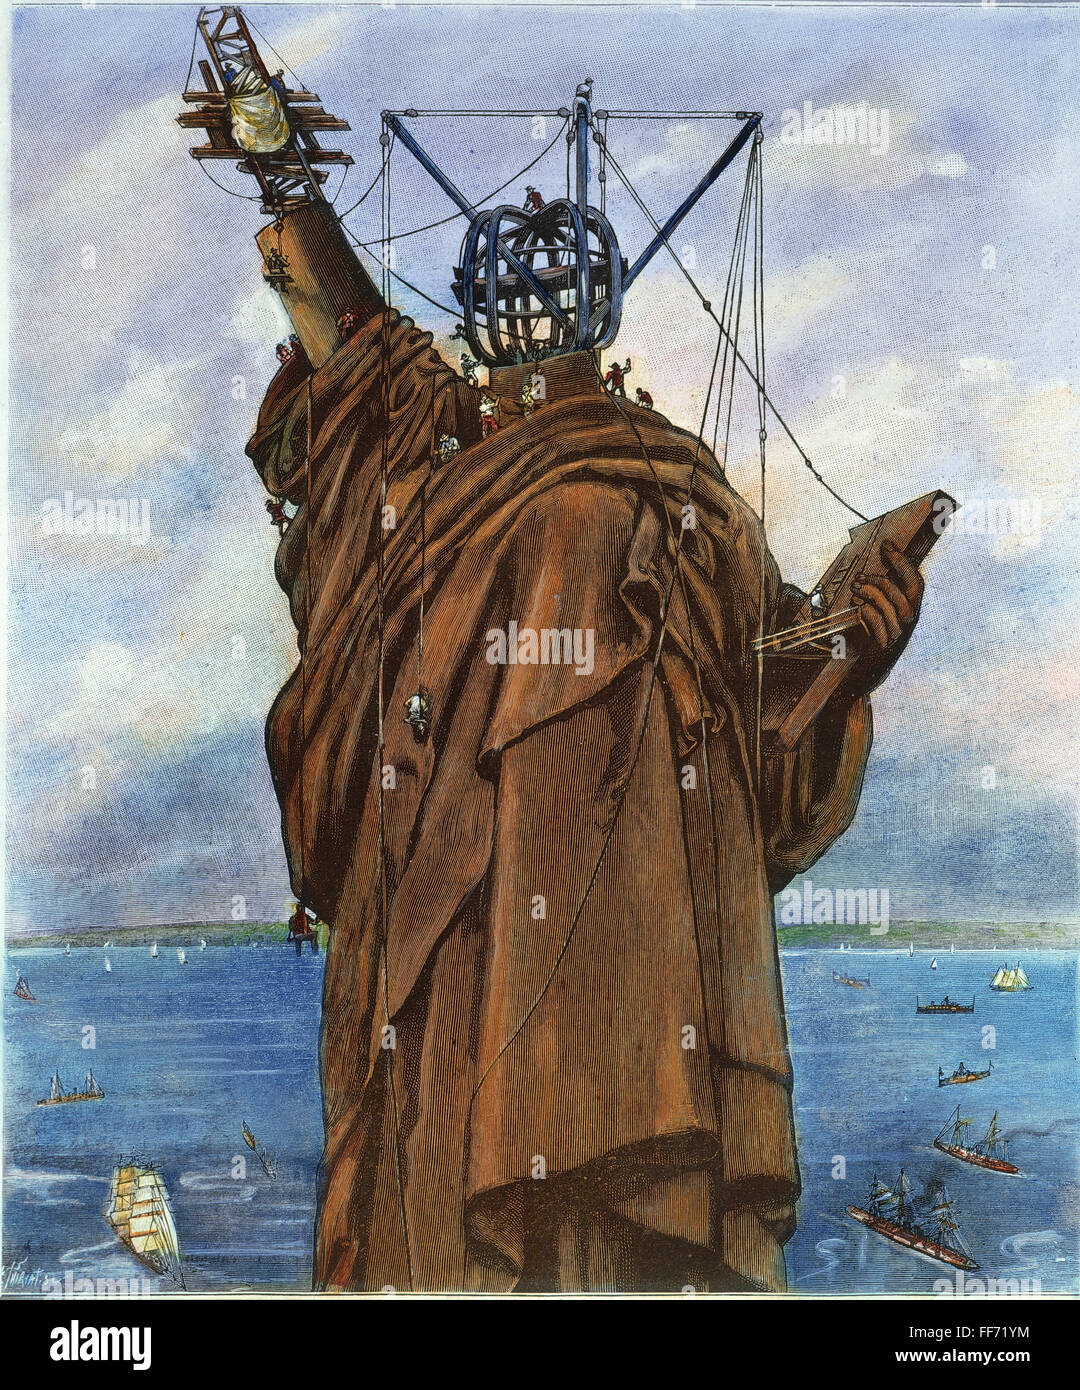 STATUE OF LIBERTY 1886. /nThe Statue of Liberty nearing completion in New York harbor in 1886. Contemporary French color engraving. Stock Photo